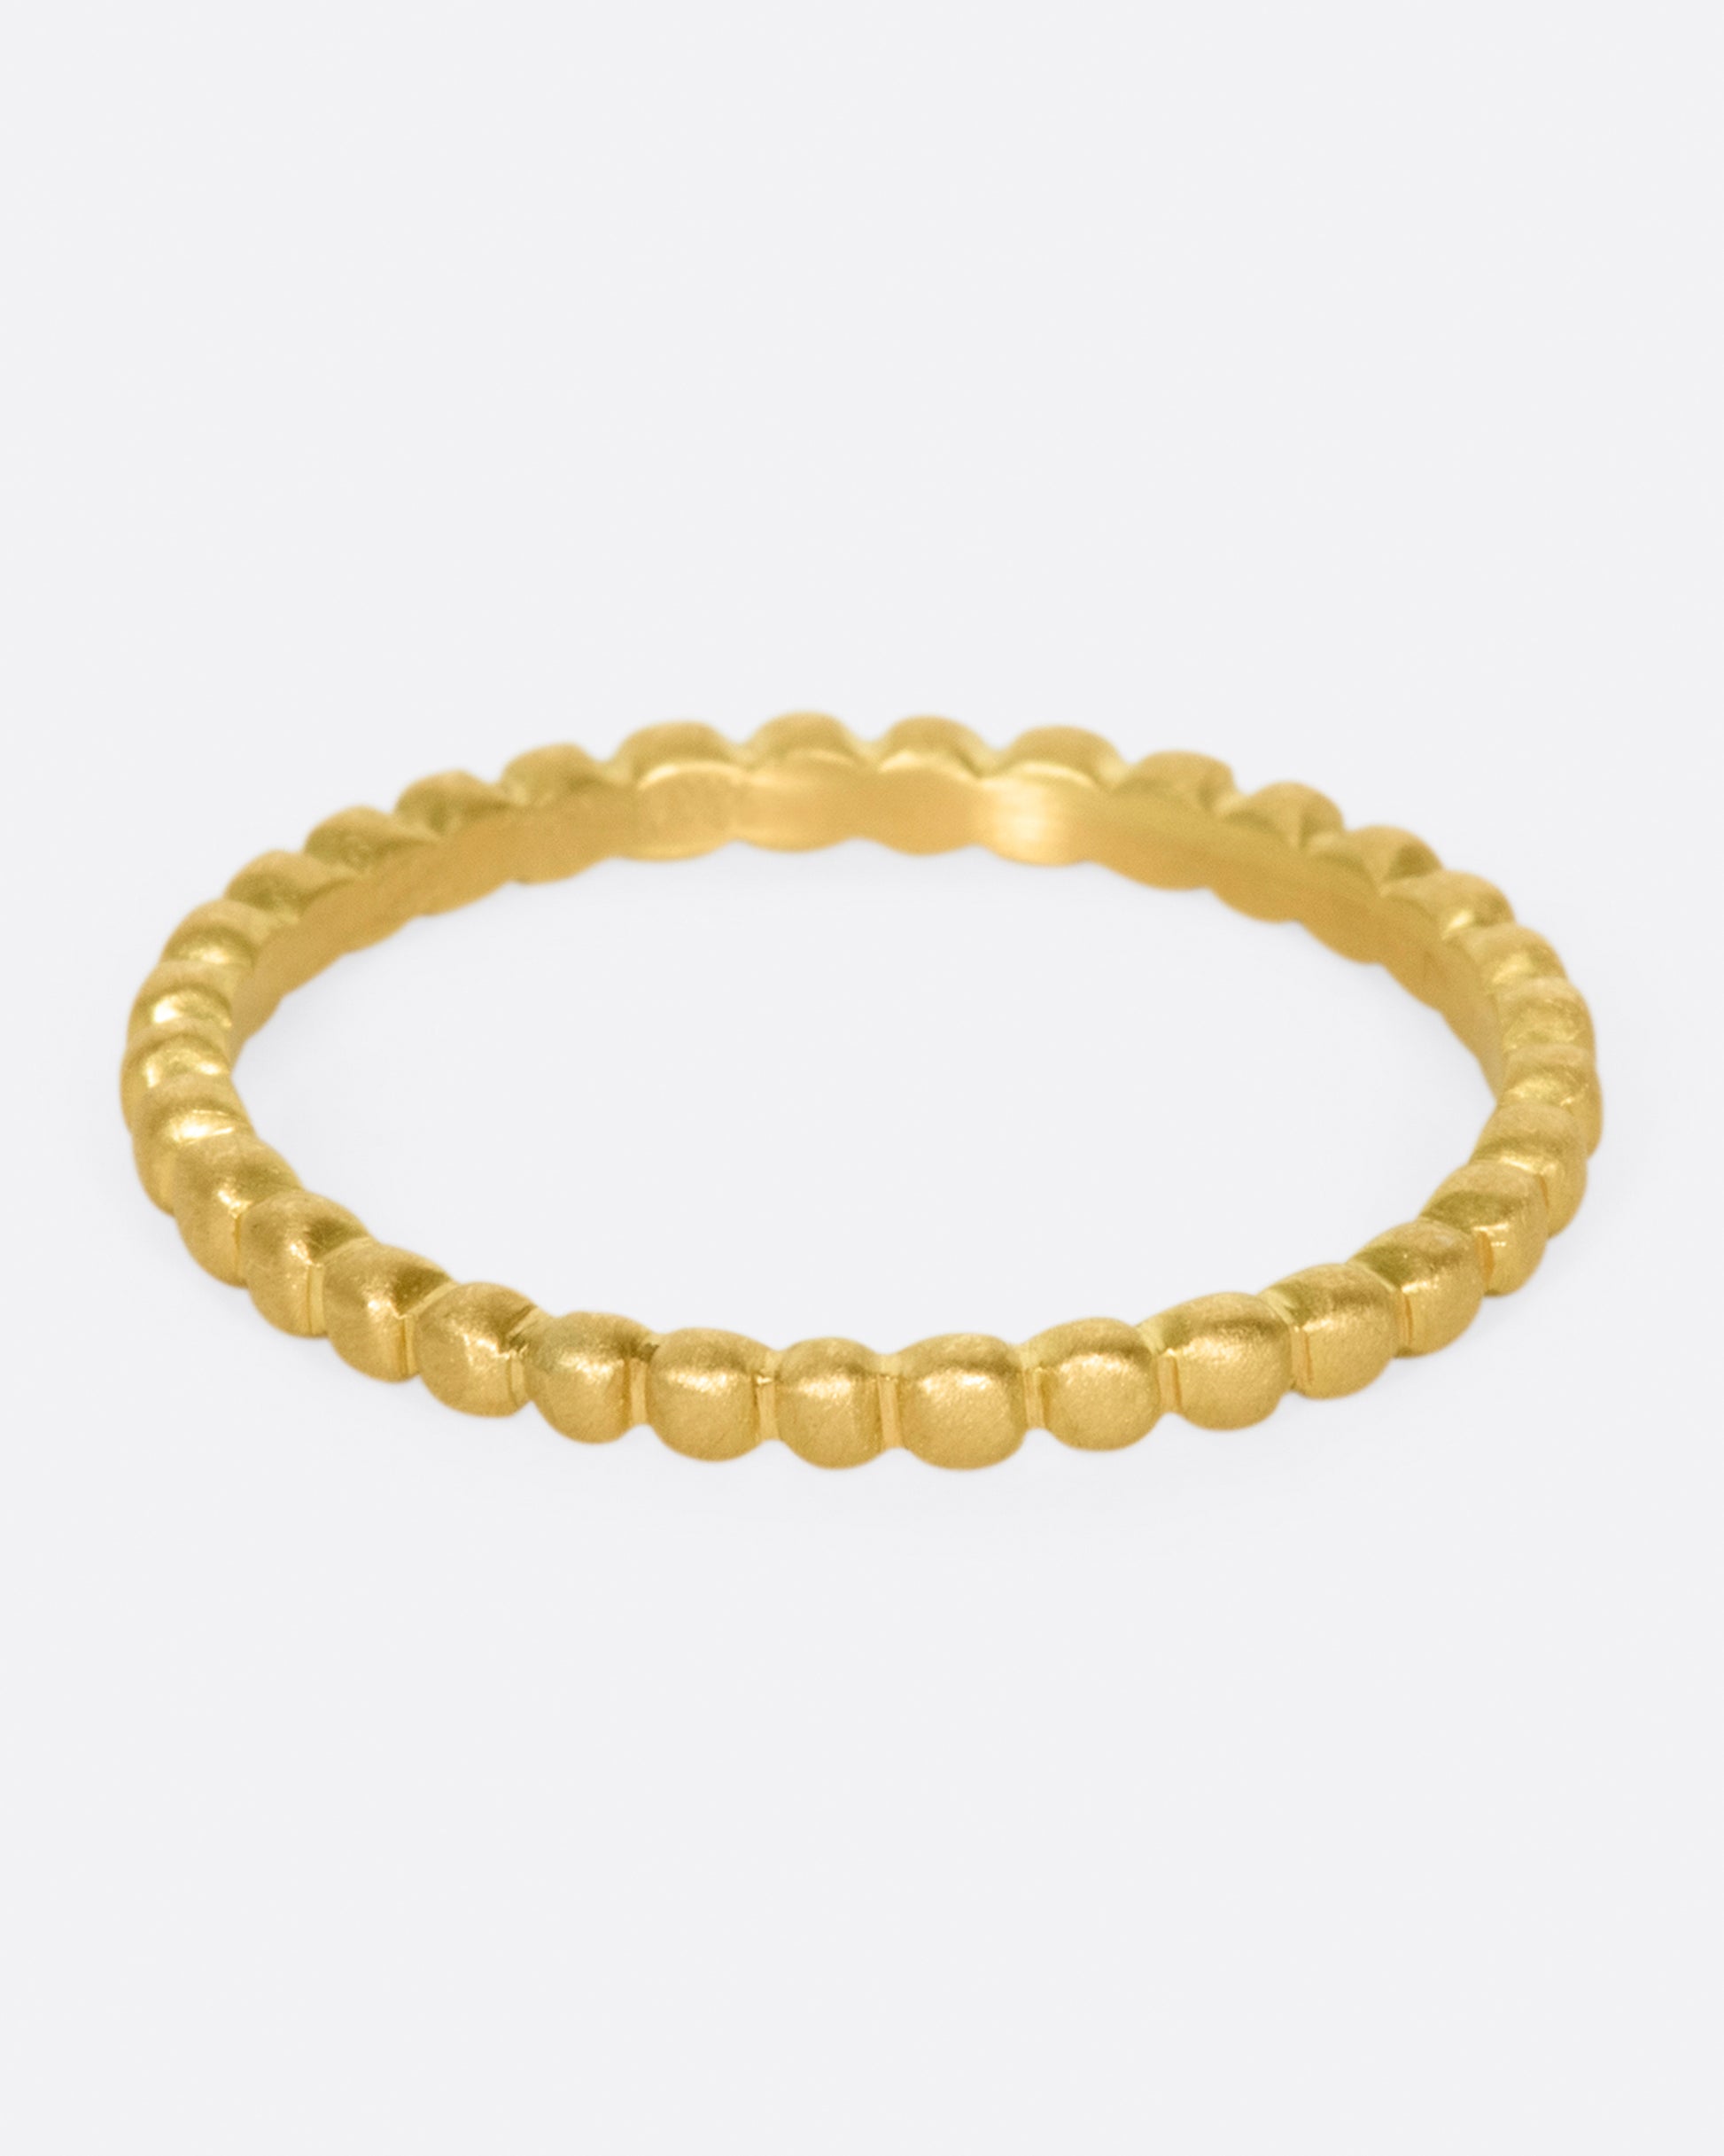 A matte gold eternity band made from dots of gold.